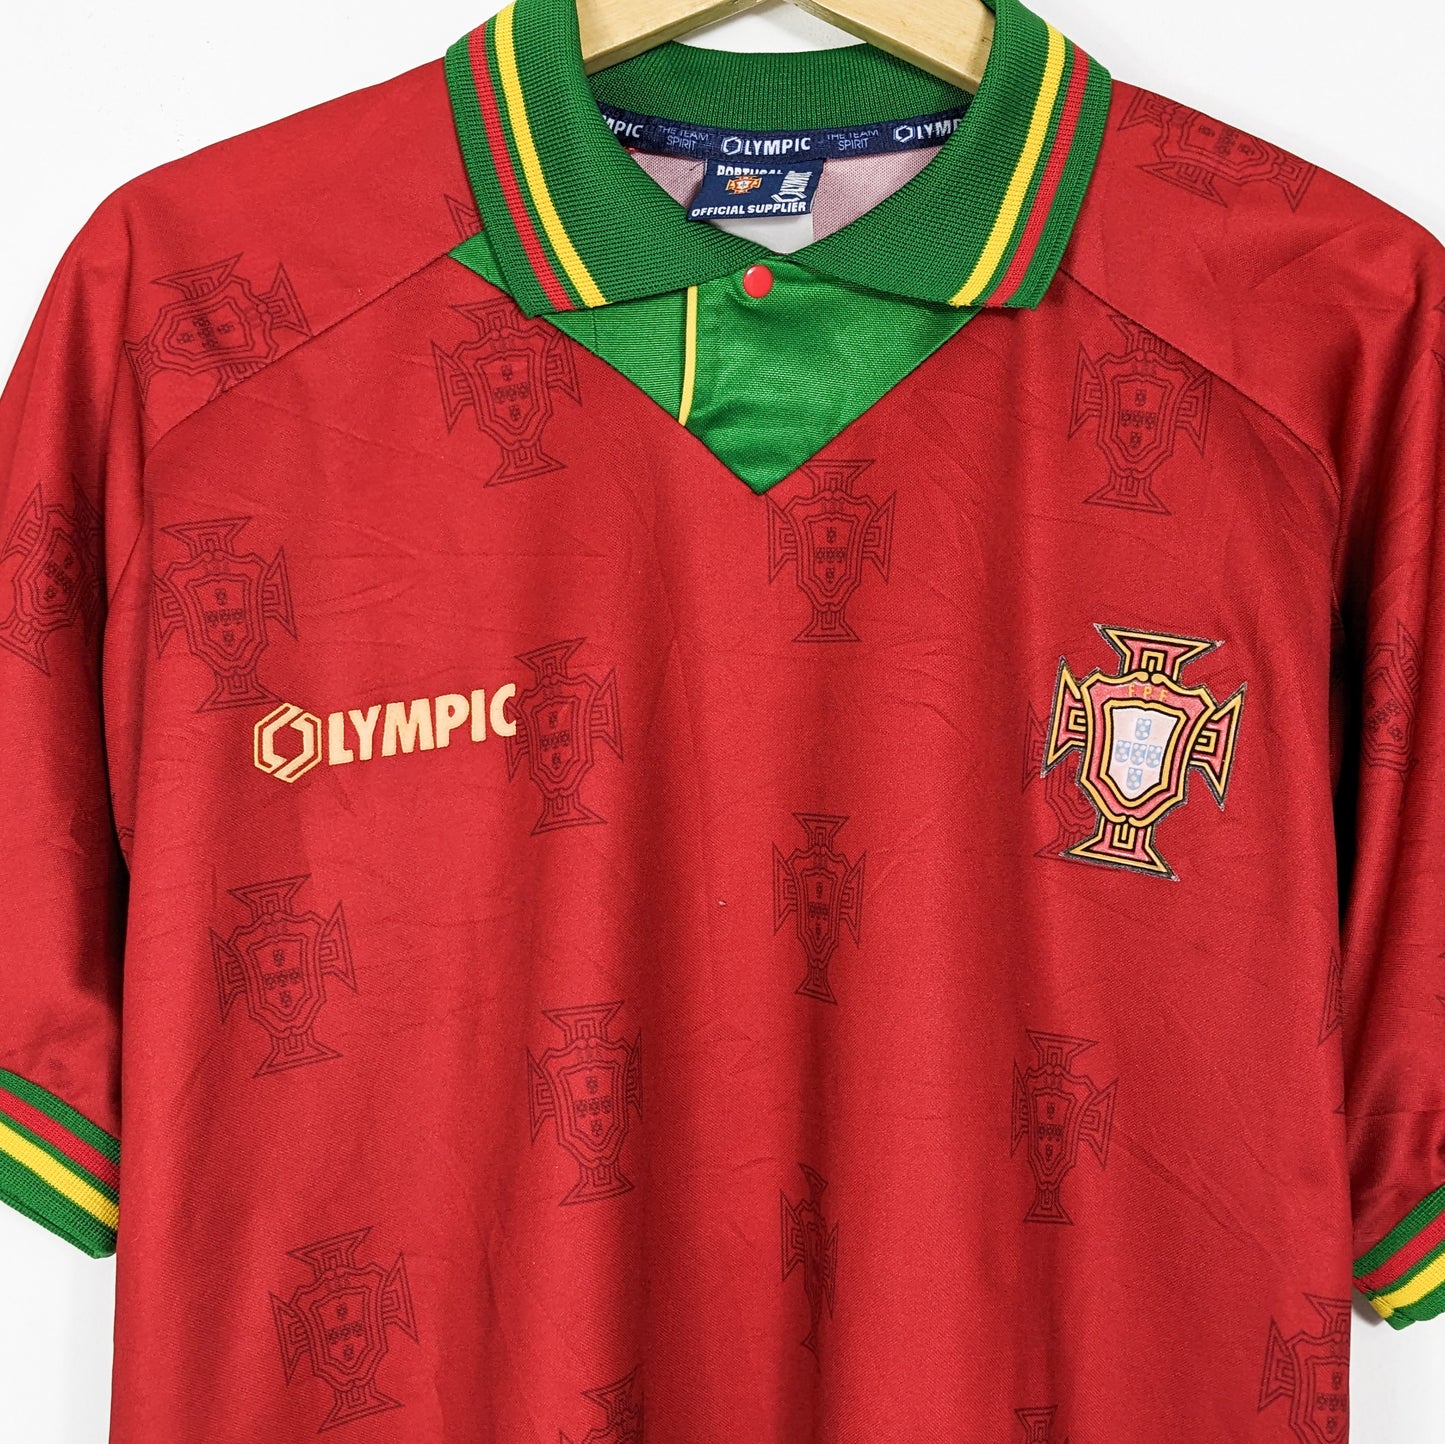 Authentic Portugal 1995/1996 Home - #10 Size L